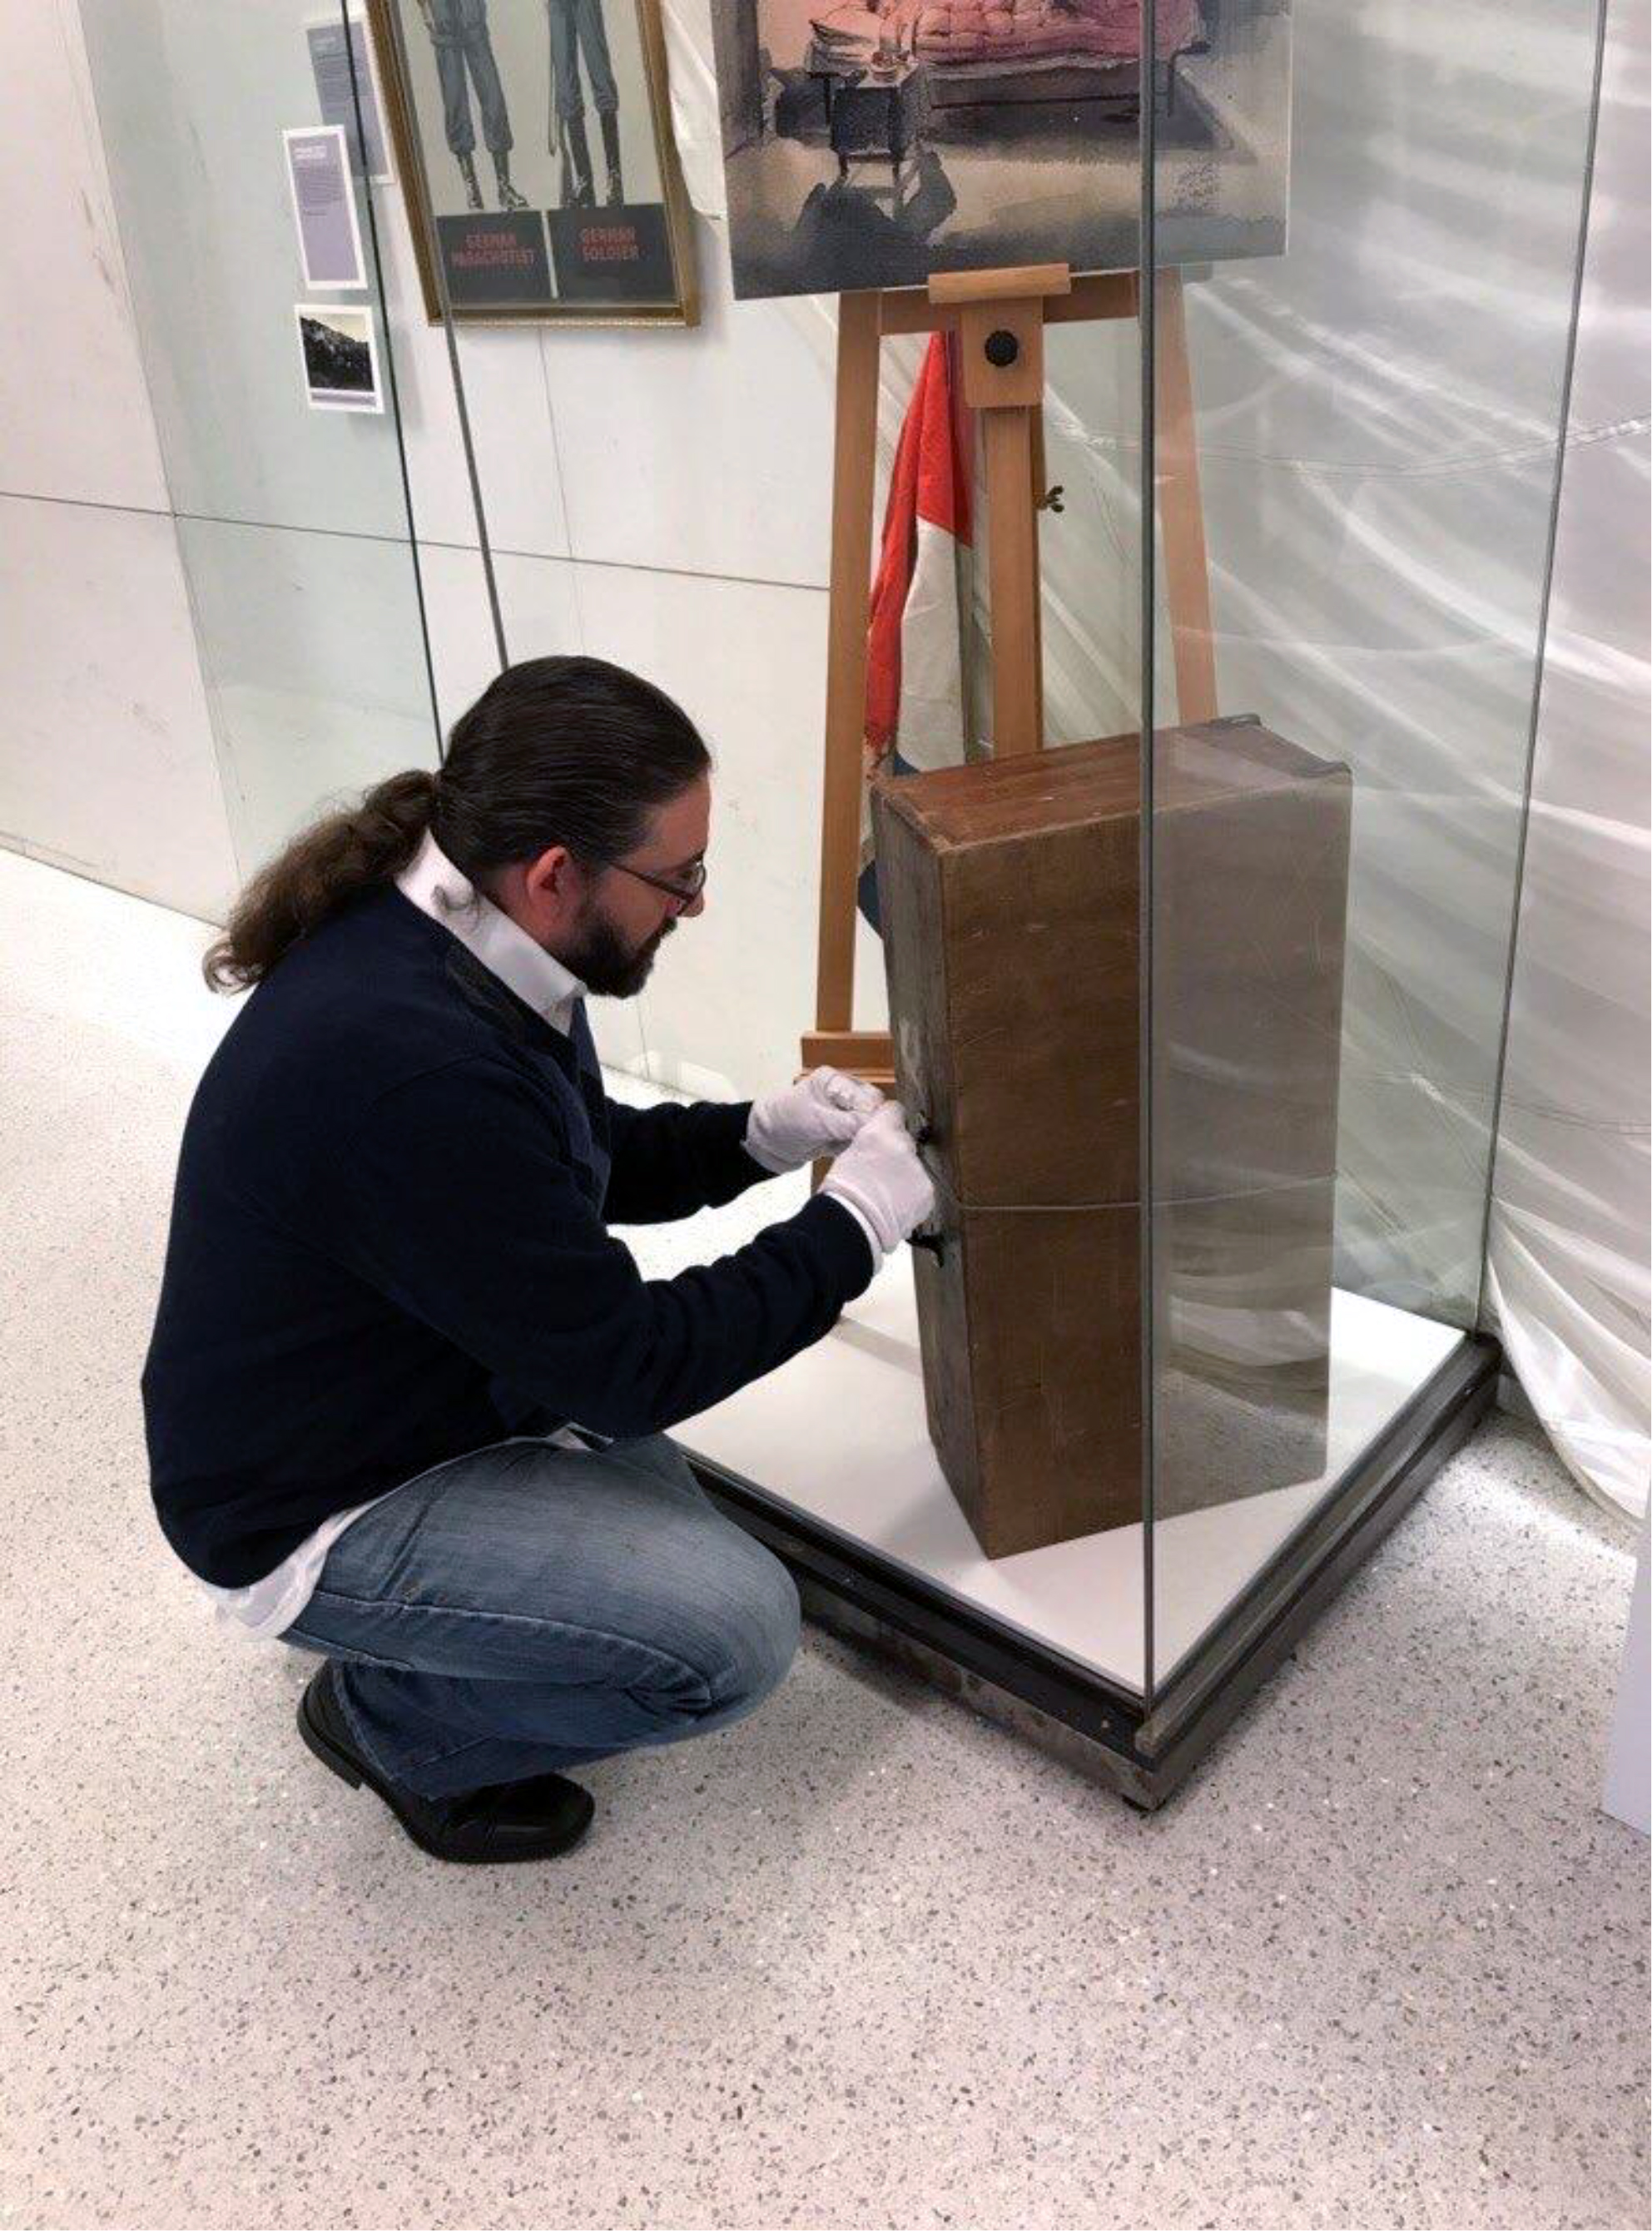 Color photograph, man assembling museum display of wooden suitcase and images on an easel.